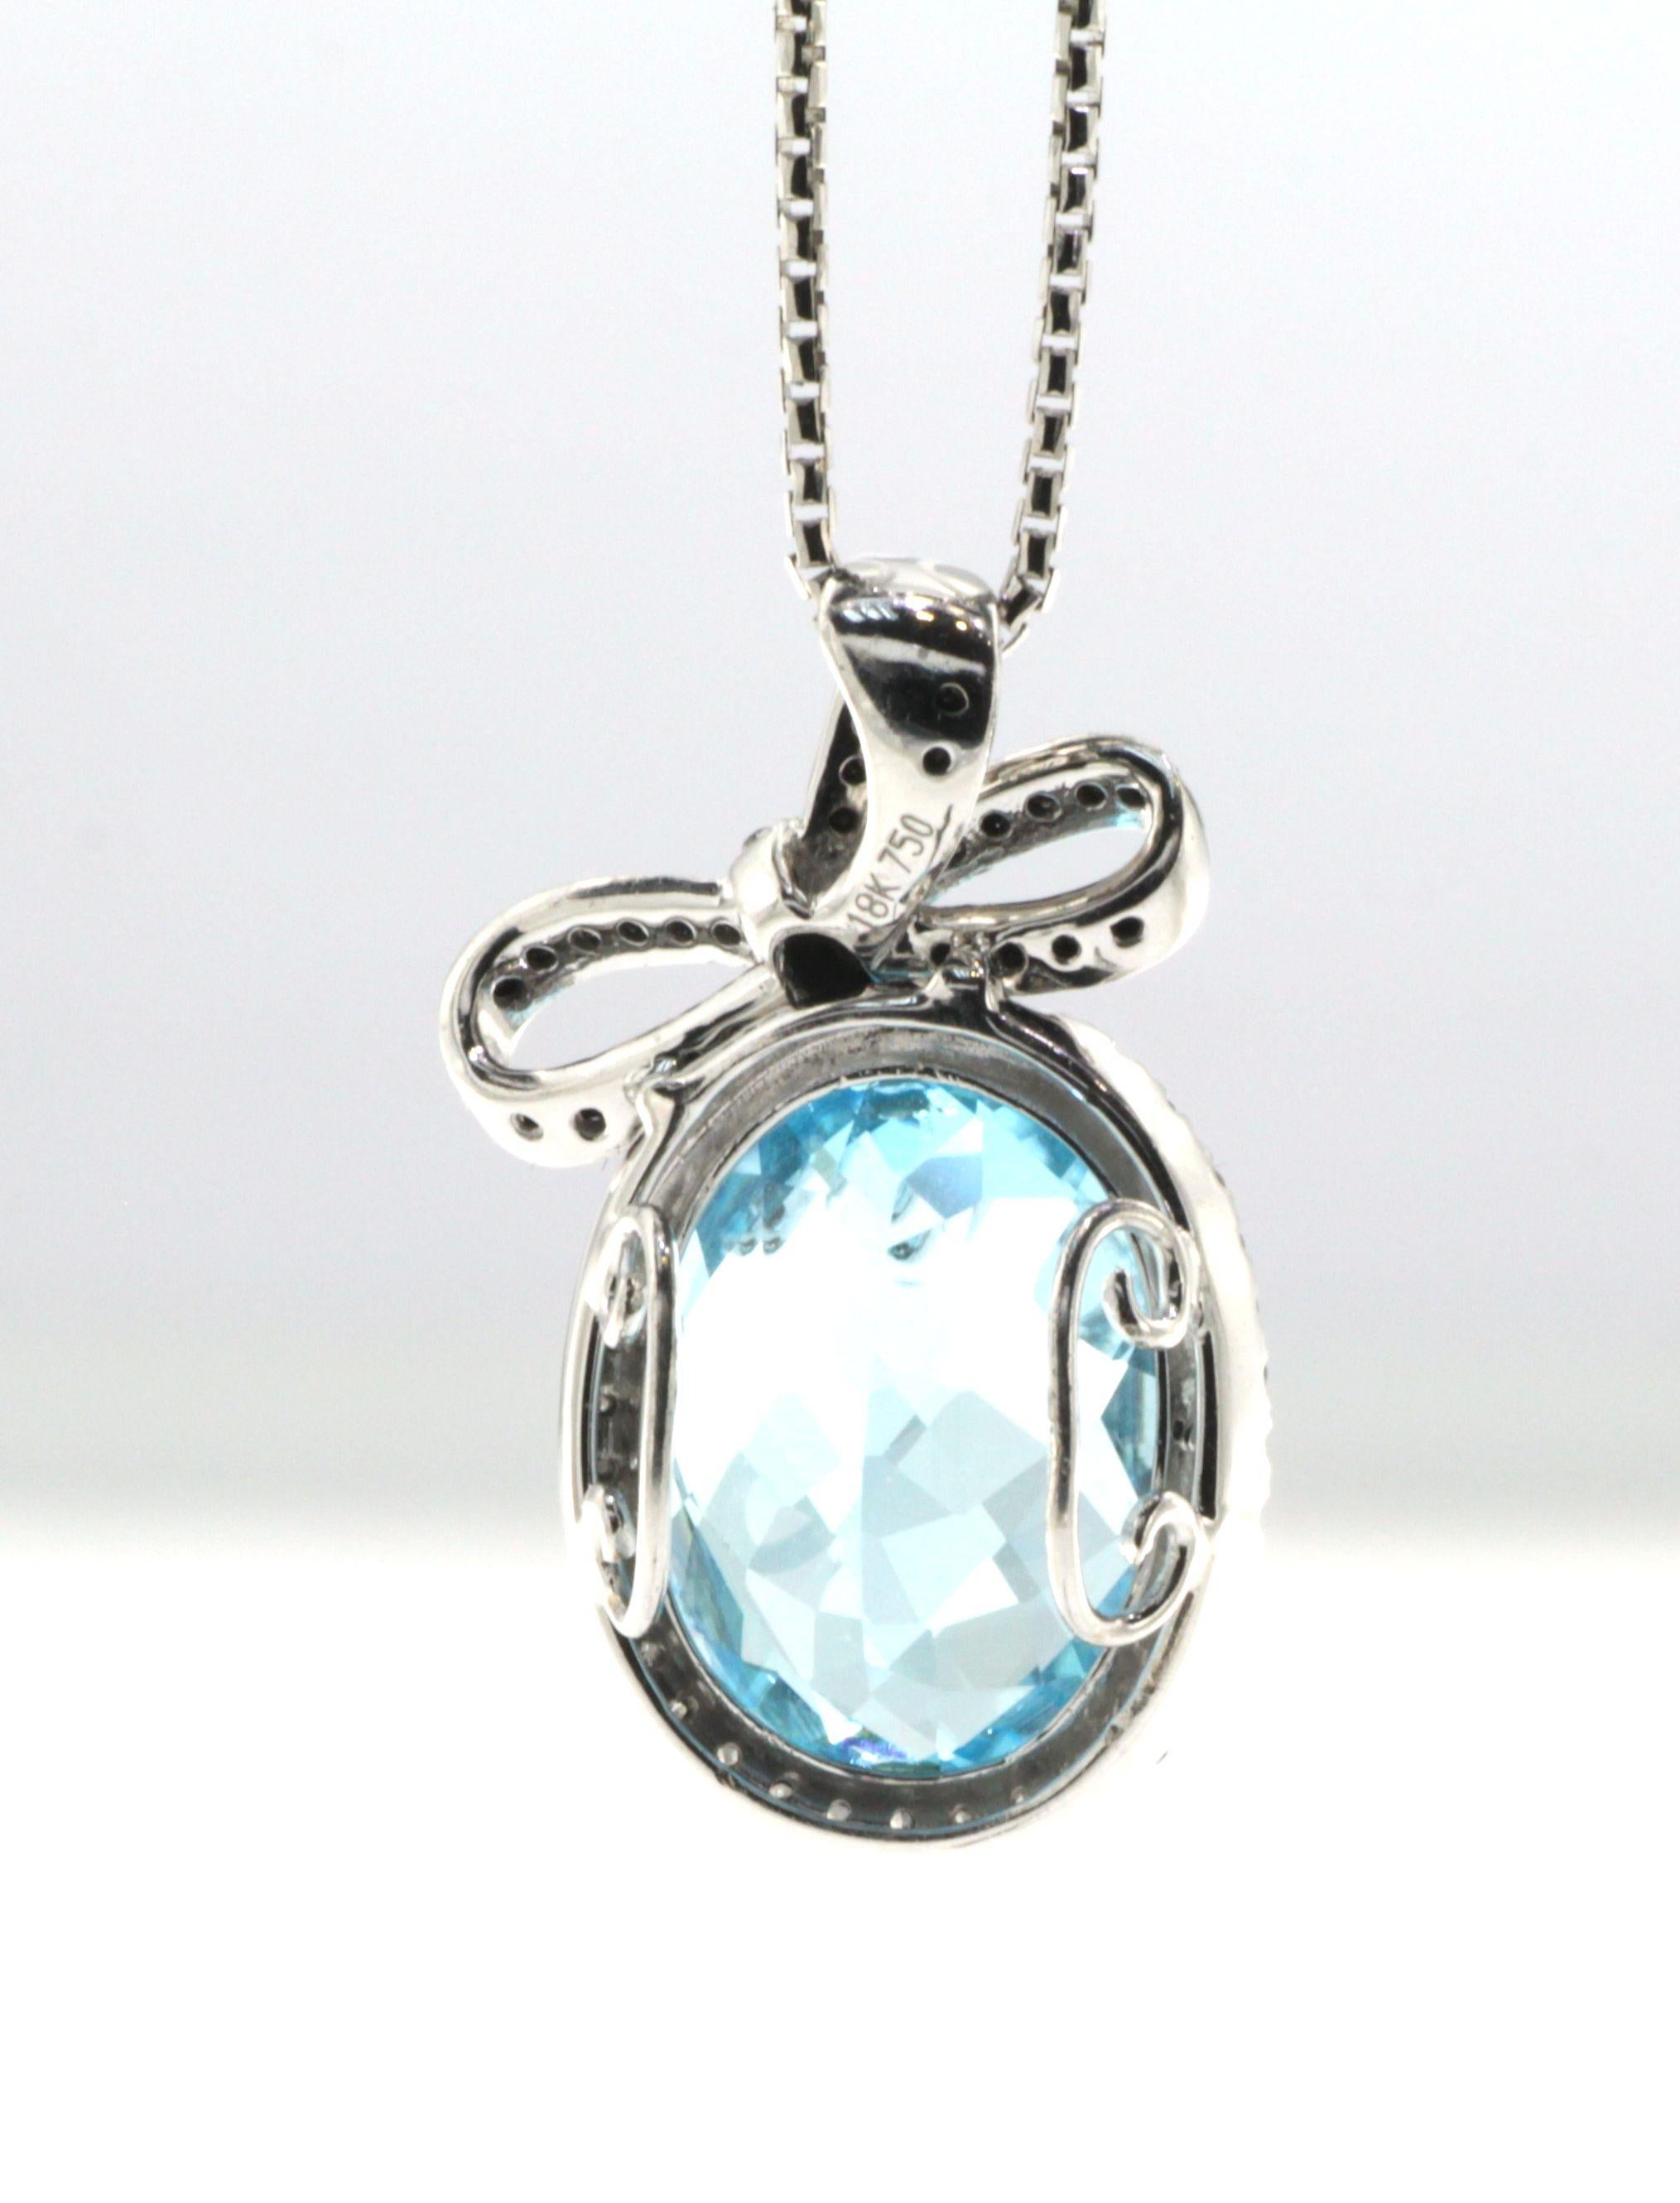 This pendant features a 10.63 carats faceted oval blue topaz, blue topaz is surrounded by 0.23 carat of white round diamond. Black diamonds are set in a ribbon on top of the blue topaz. Pendant is set in 18 karat white gold. Chain is not included.